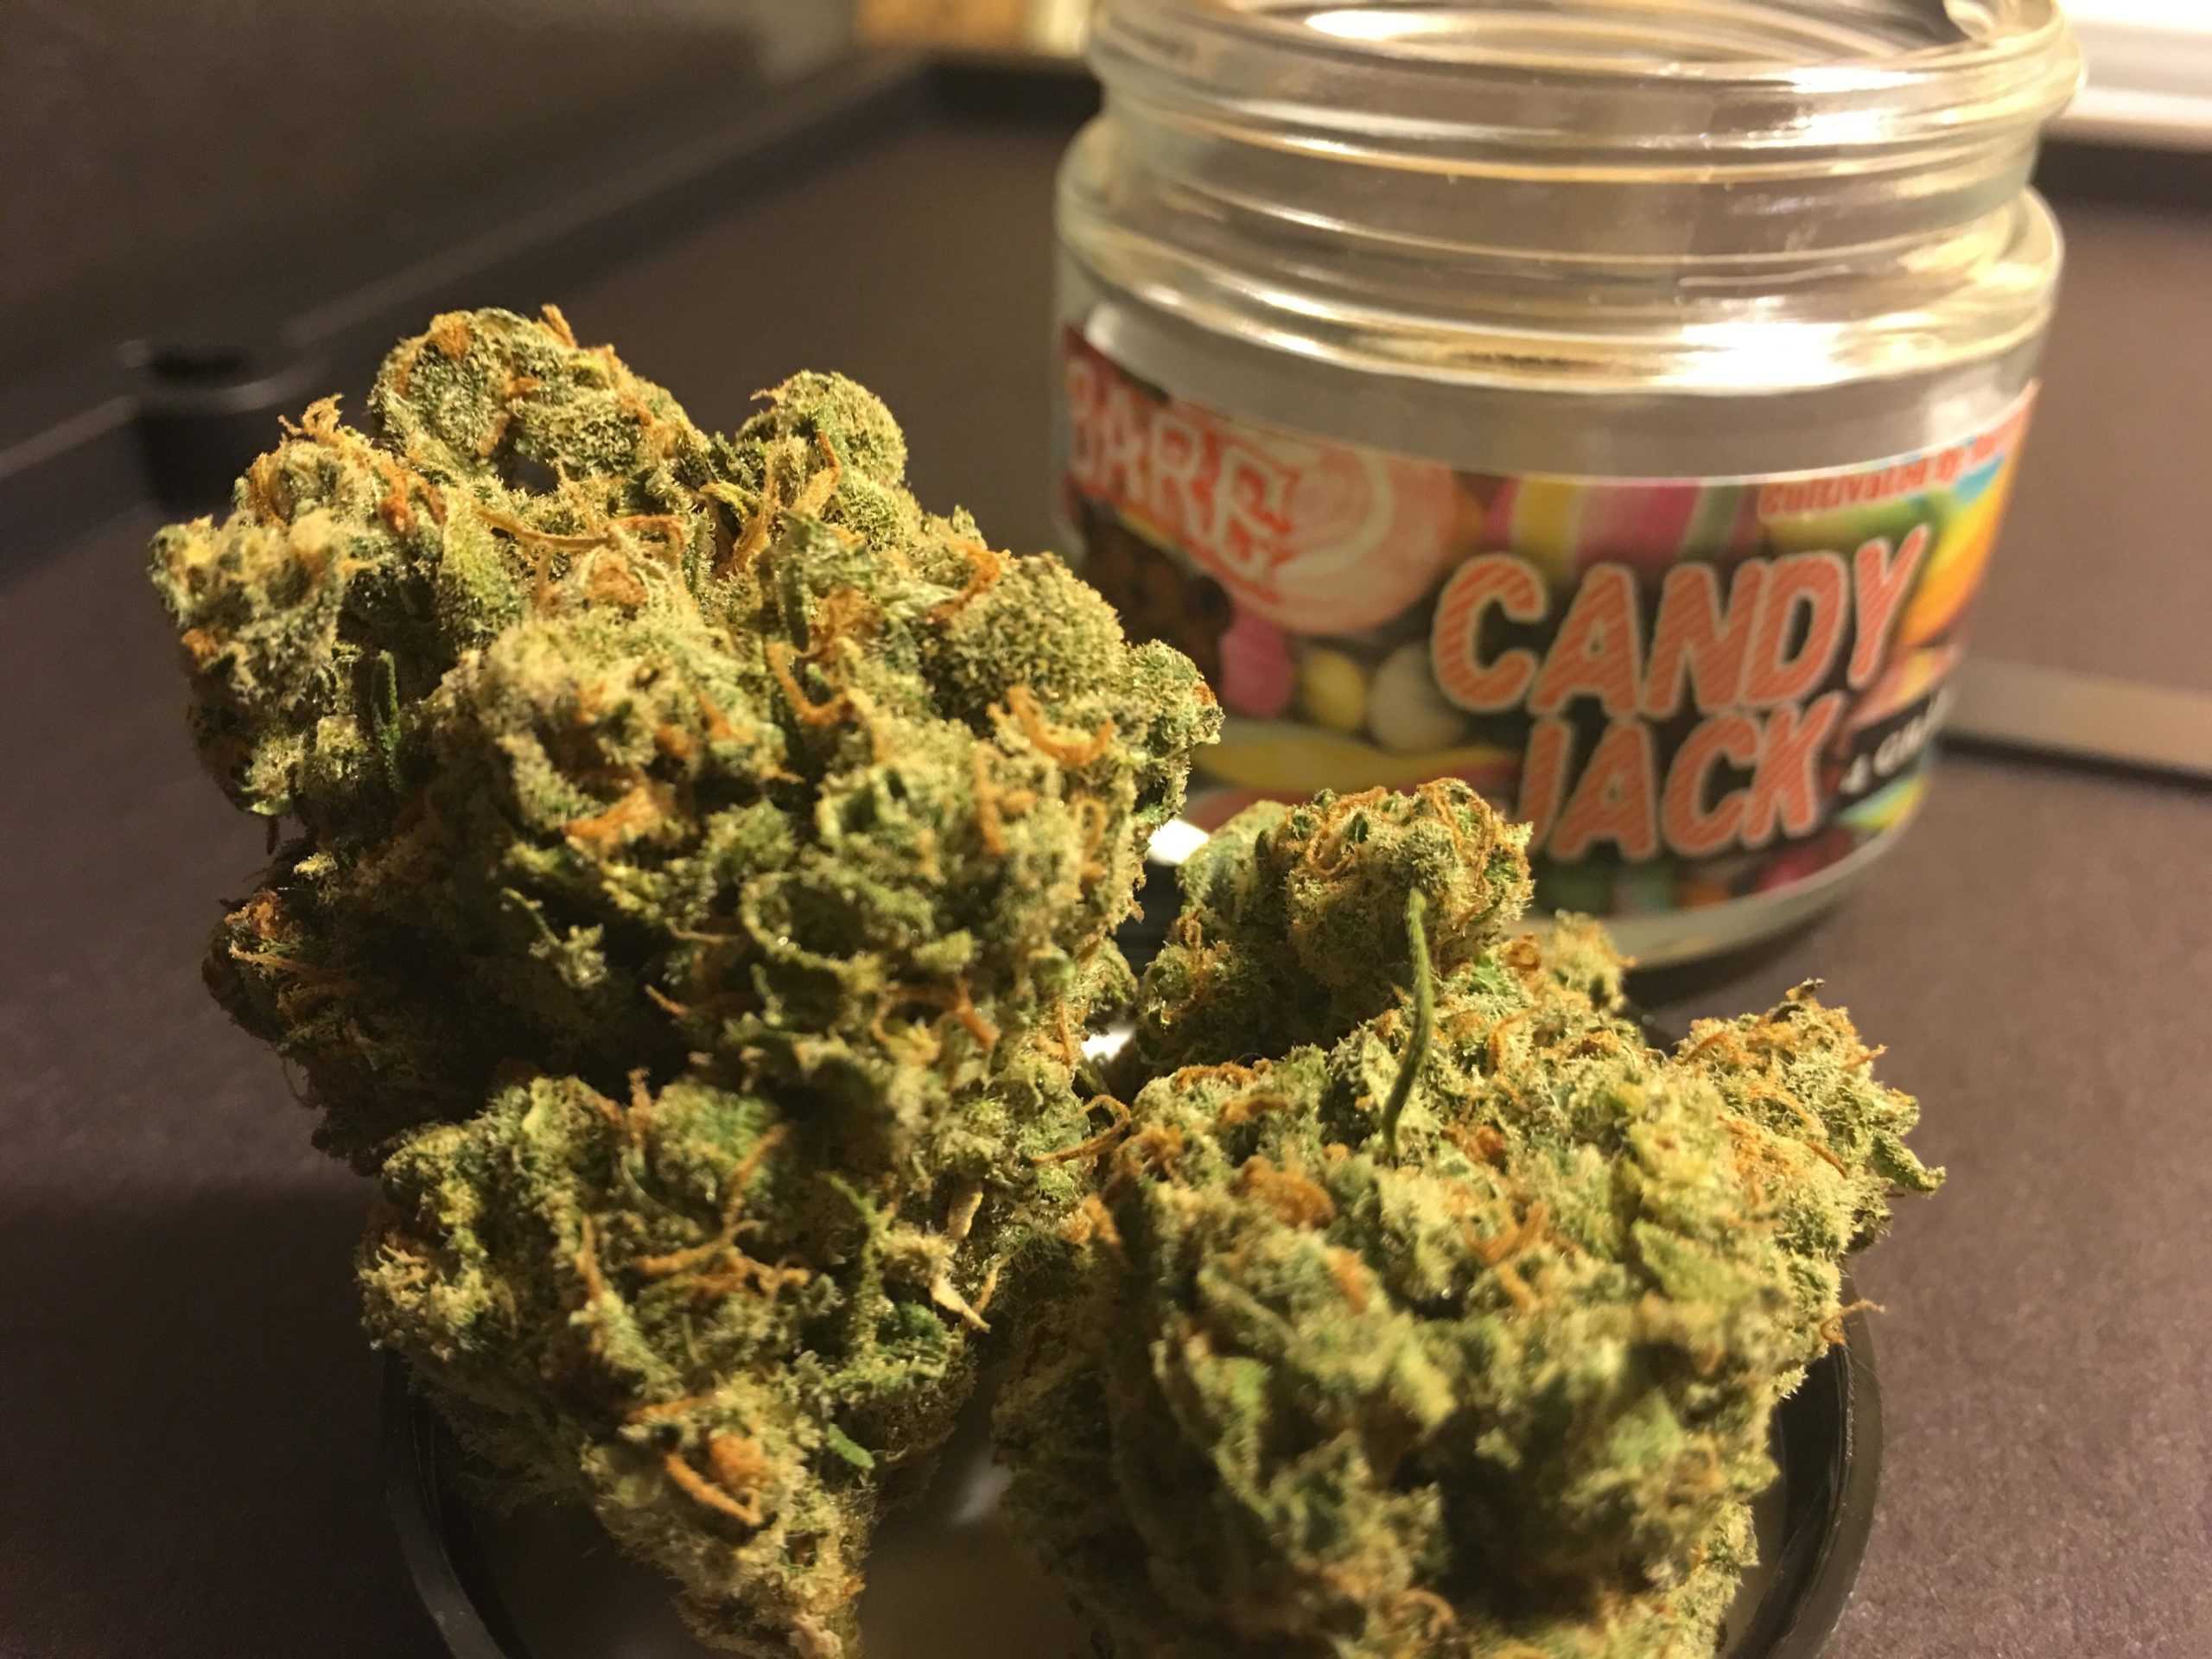 candy jack weed